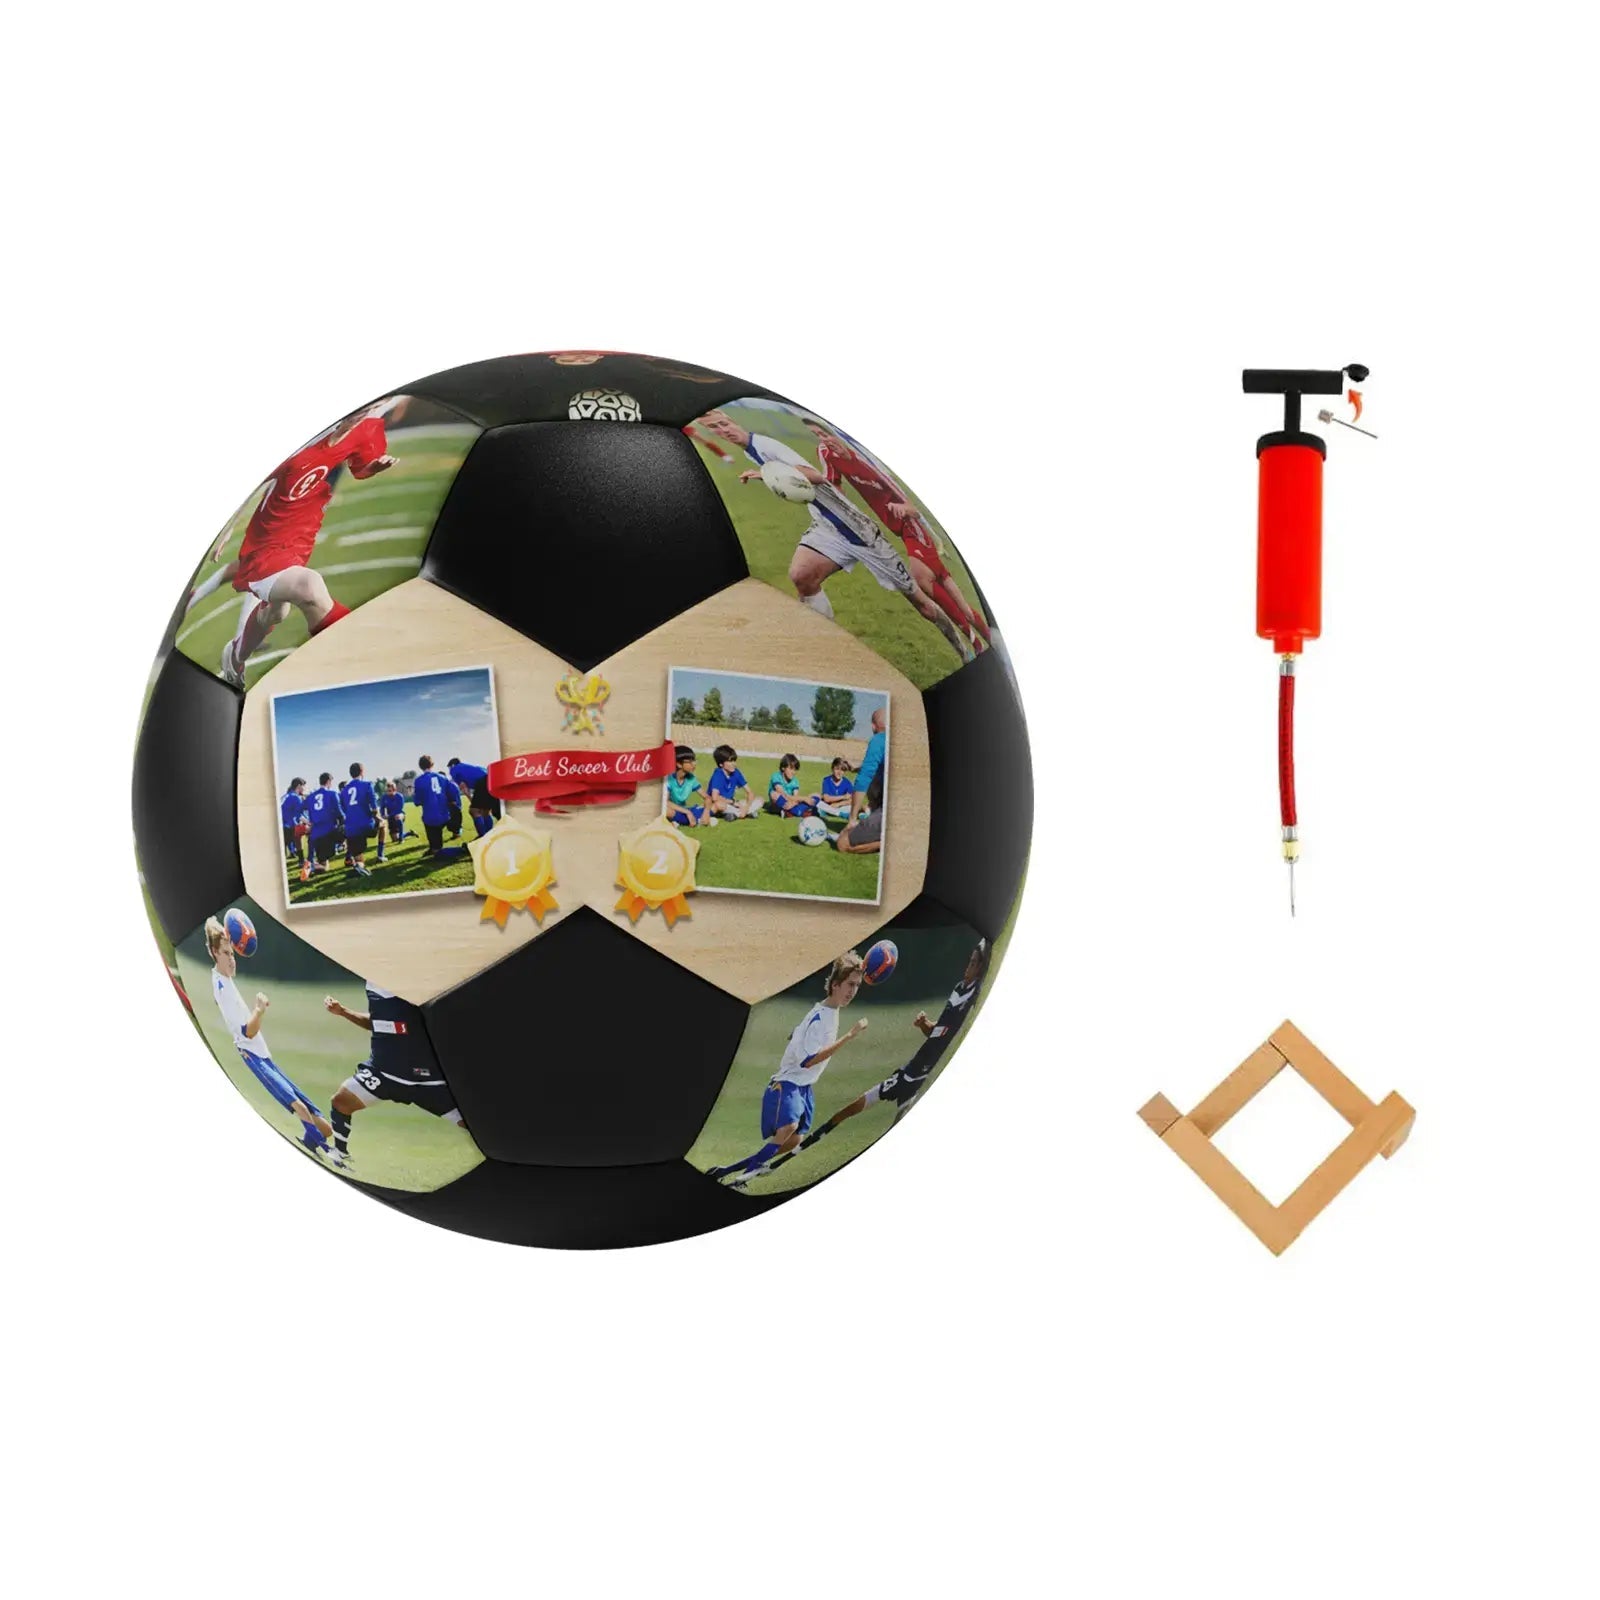 Personalized Custom Gift Soccer Ball For Child, No. 5 - Family Watchs